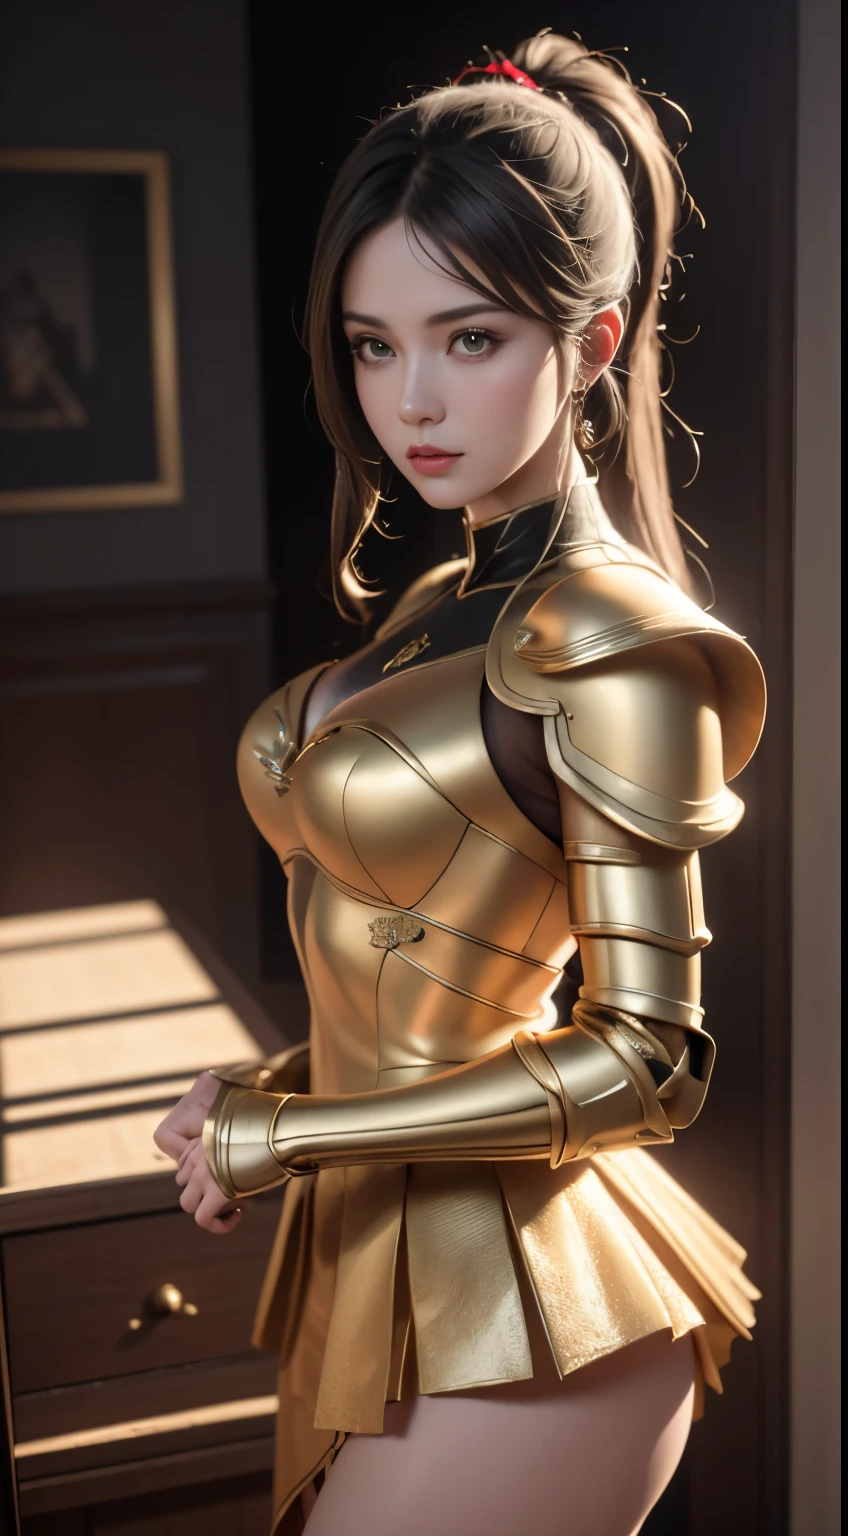 ((best quality)), ((masterpiece)), (detailed:1.4), 3D, Image of a beautiful Chinese fairy,Gold armor dress，HDR (High Dynamic Range),Ray Tracing,NVIDIA RTX,Super Resolution,Unreal 5,Subsurface scattering,PBR Textures,Post-Processing,Anisotropic filtering,Depth of Field,Maximum clarity and sharpness,Multi-layered textures,Albedo and Specular Maps,Surface Shading,Accurately simulate the interaction of light with materials,Perfect proportion,Octane Rendering,Two-color lighting,Large aperture,Low ISO,White Balance,Rule of Thirds,8K Native,